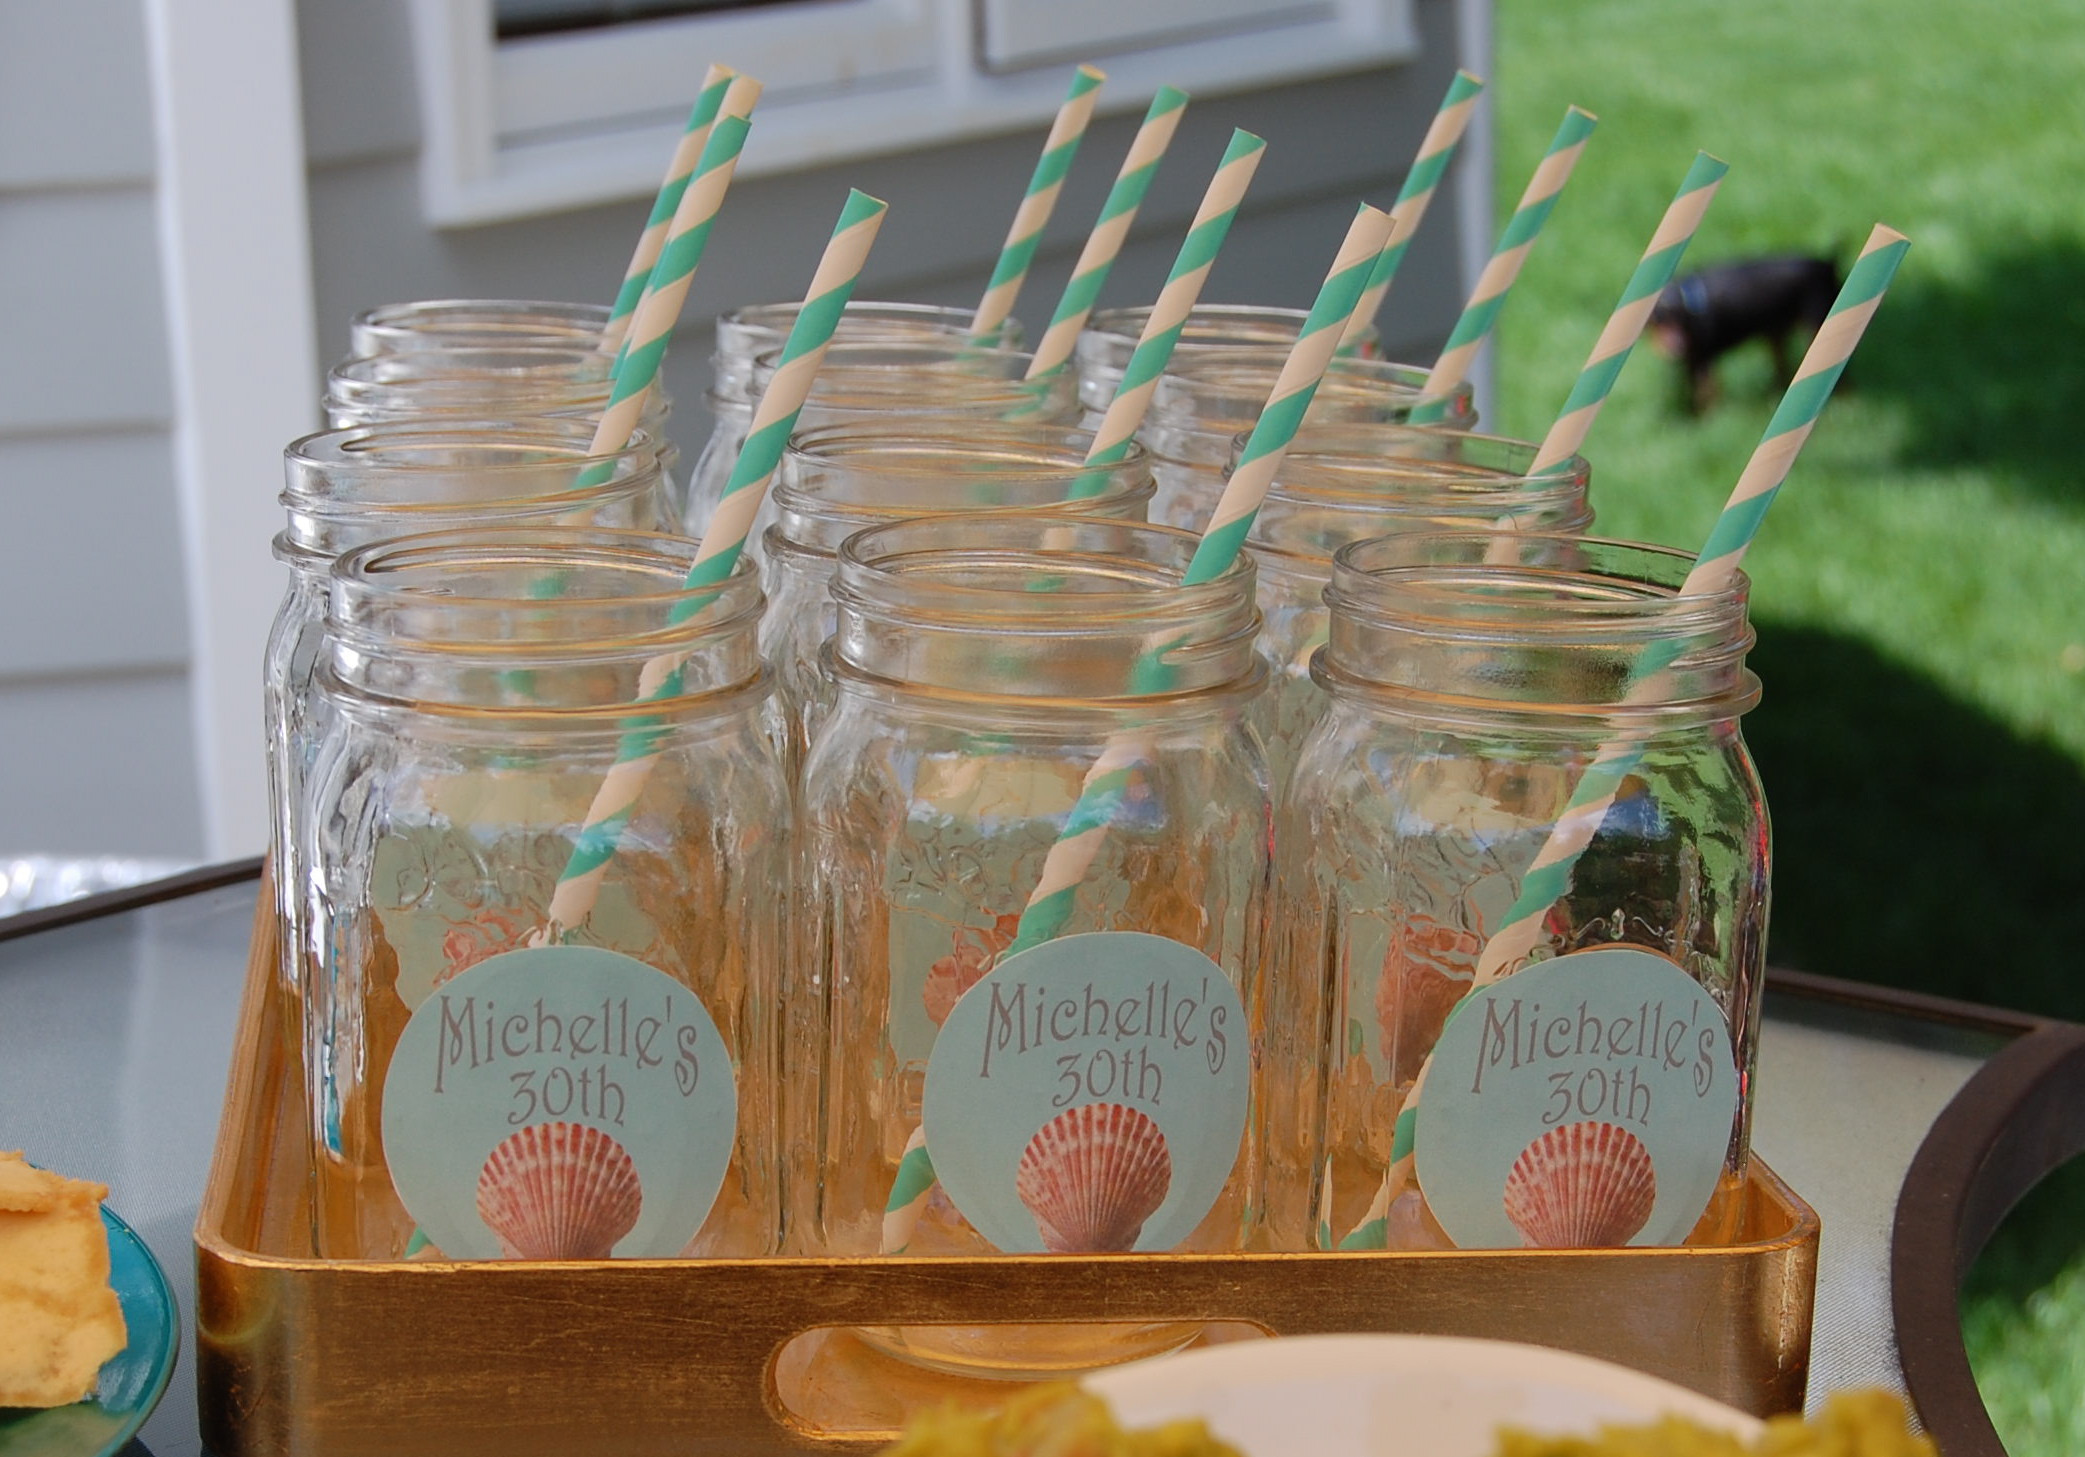 Decorating Ideas For Beach Party
 Beach Theme Party